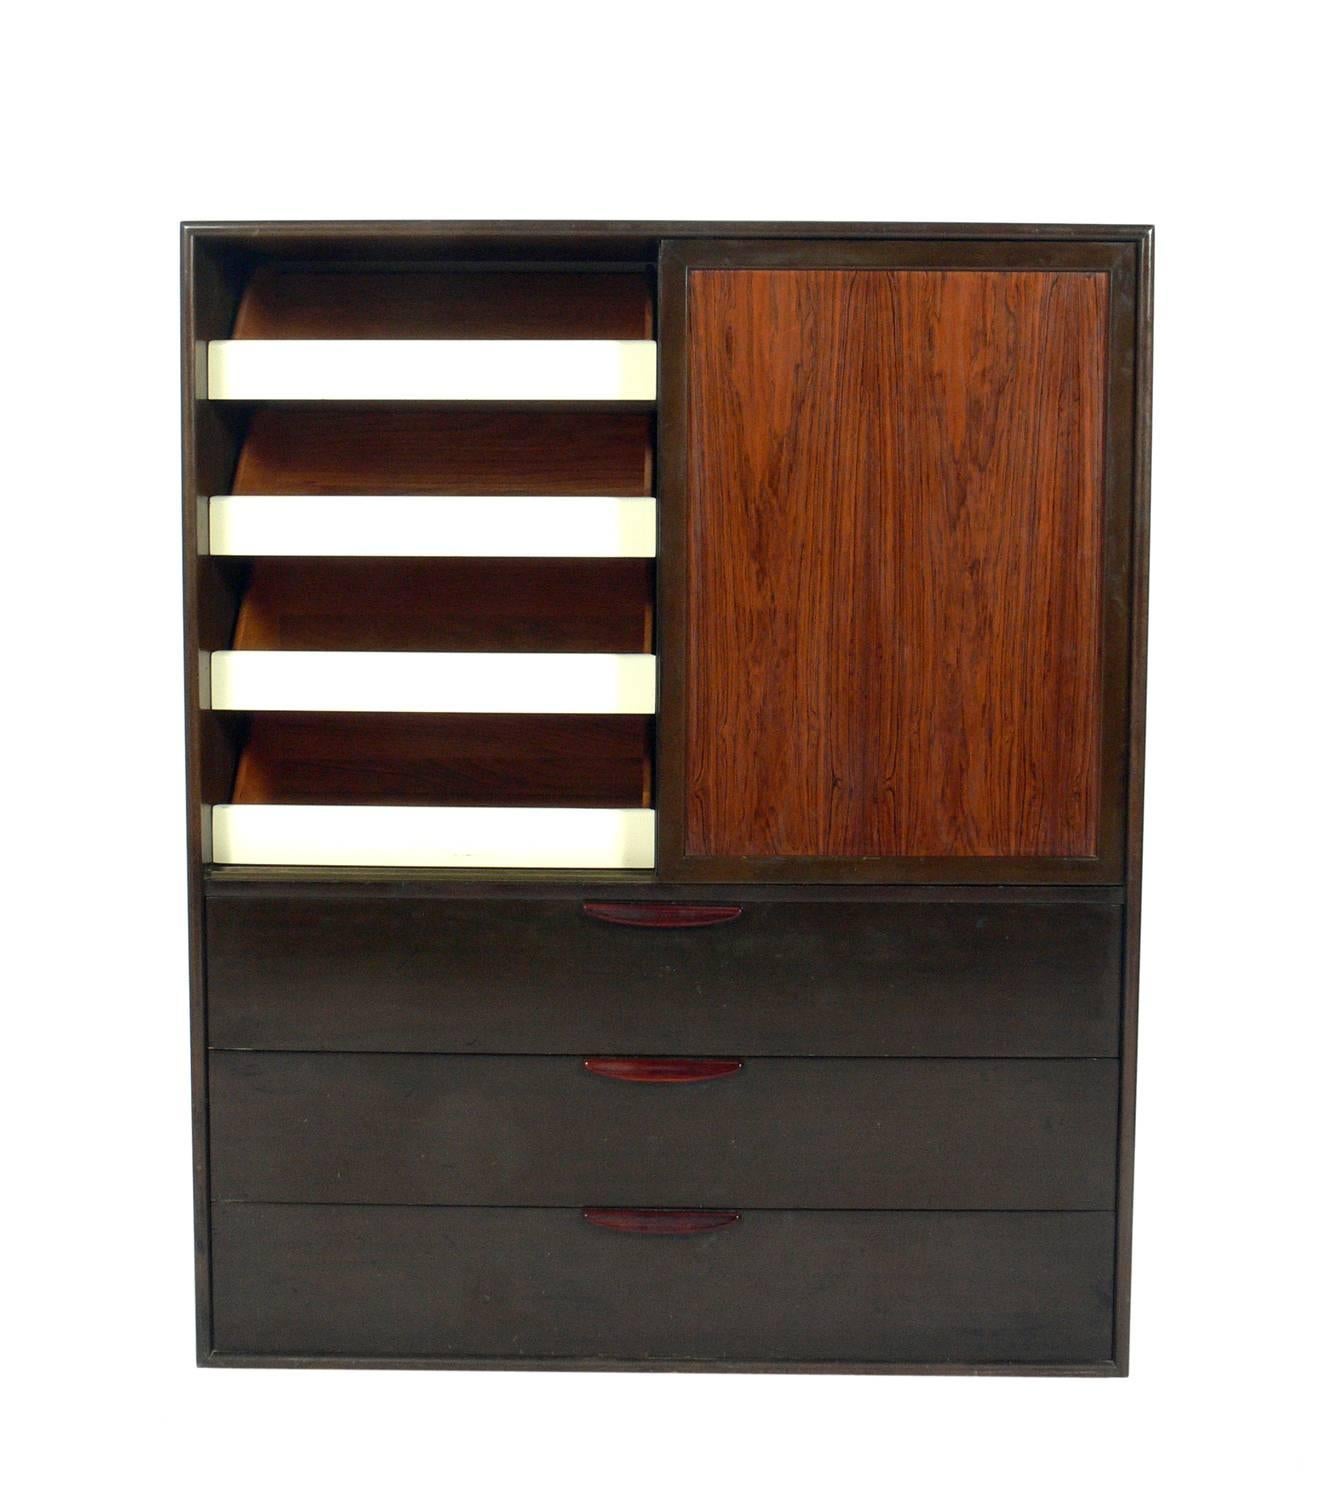 Tall rosewood chest of drawers or dresser, designed by Harvey Probber, American, circa 1960s. It offers a voluminous amount of storage. It features sliding doors at the top that open to reveal four deep drawers on the left, and three deep sliding